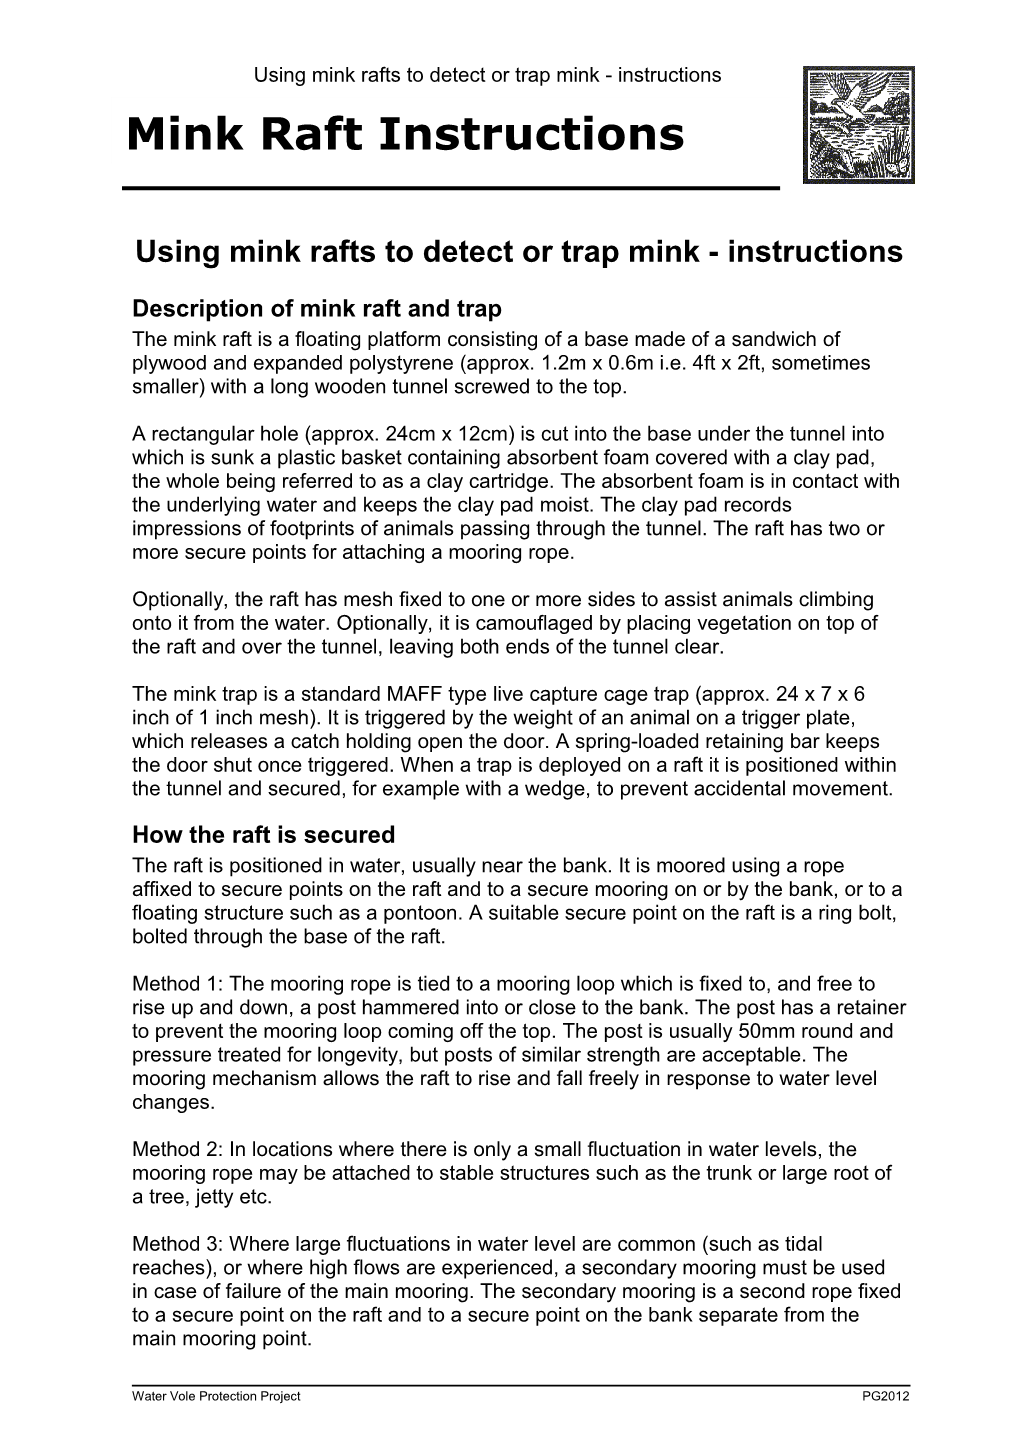 Using Mink Rafts to Detect Or Trap Mink - Instructions